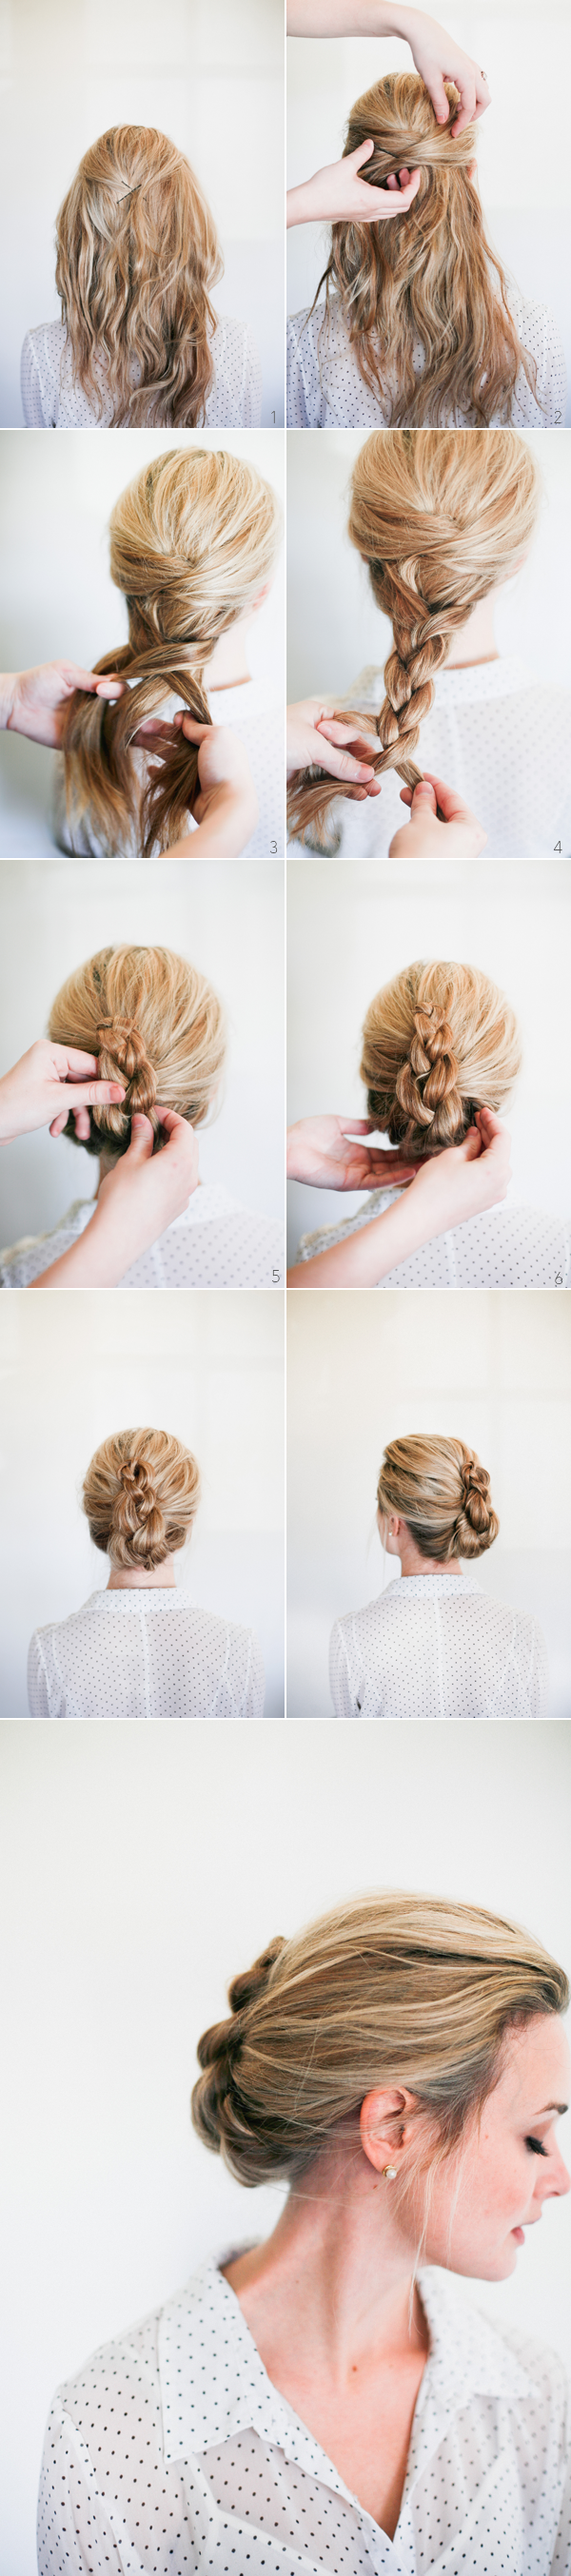 braided-french-twist-wedding-hairstyles-for-long-hair